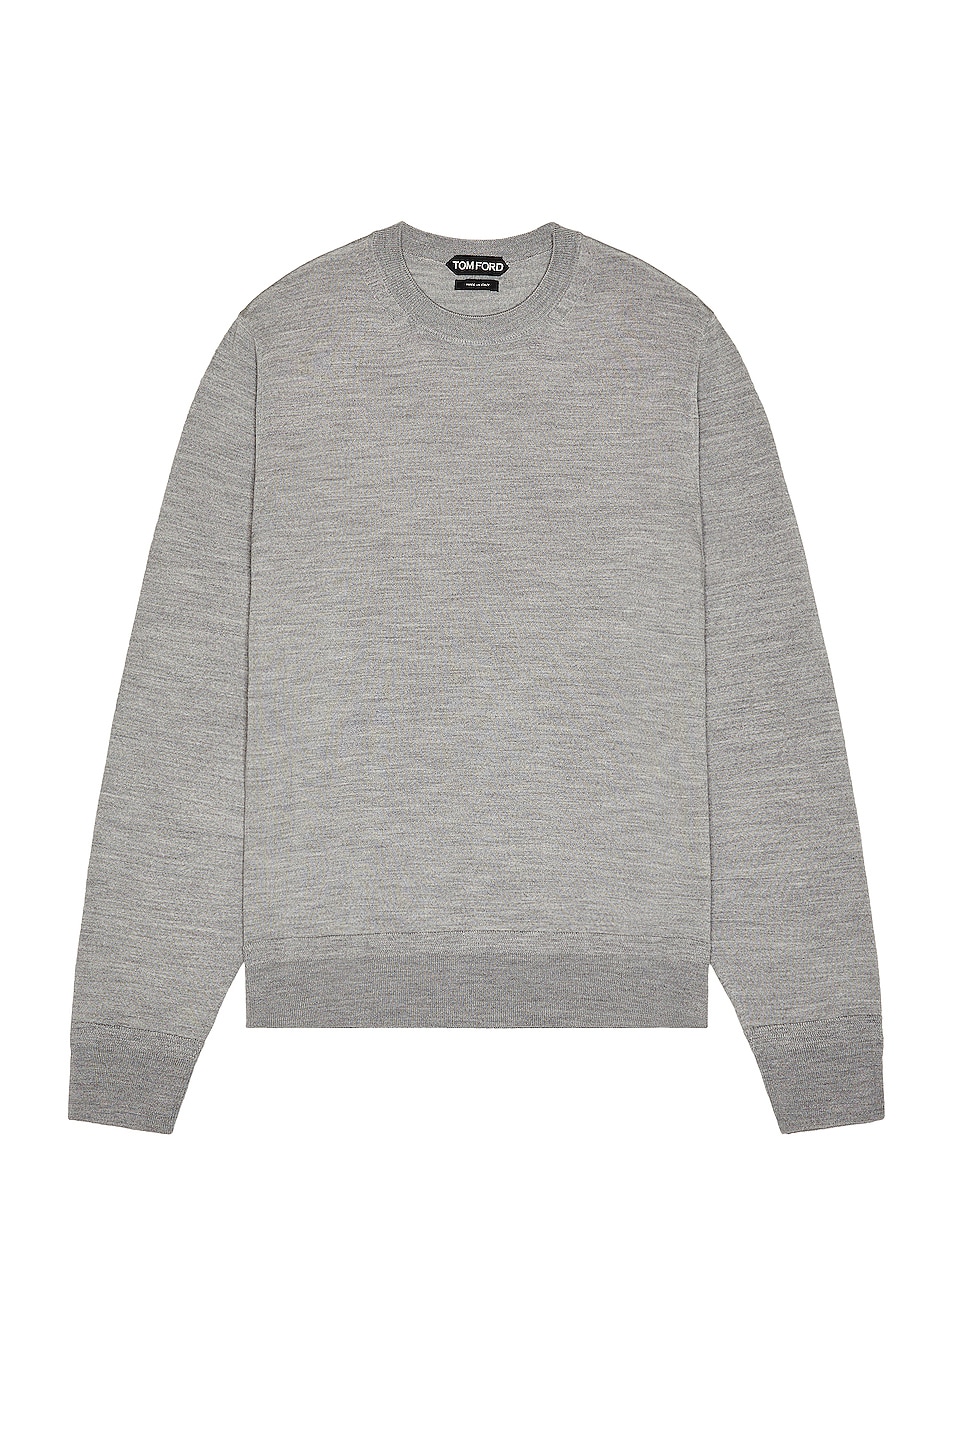 Image 1 of TOM FORD Jersey Stitch Sweater in Grey